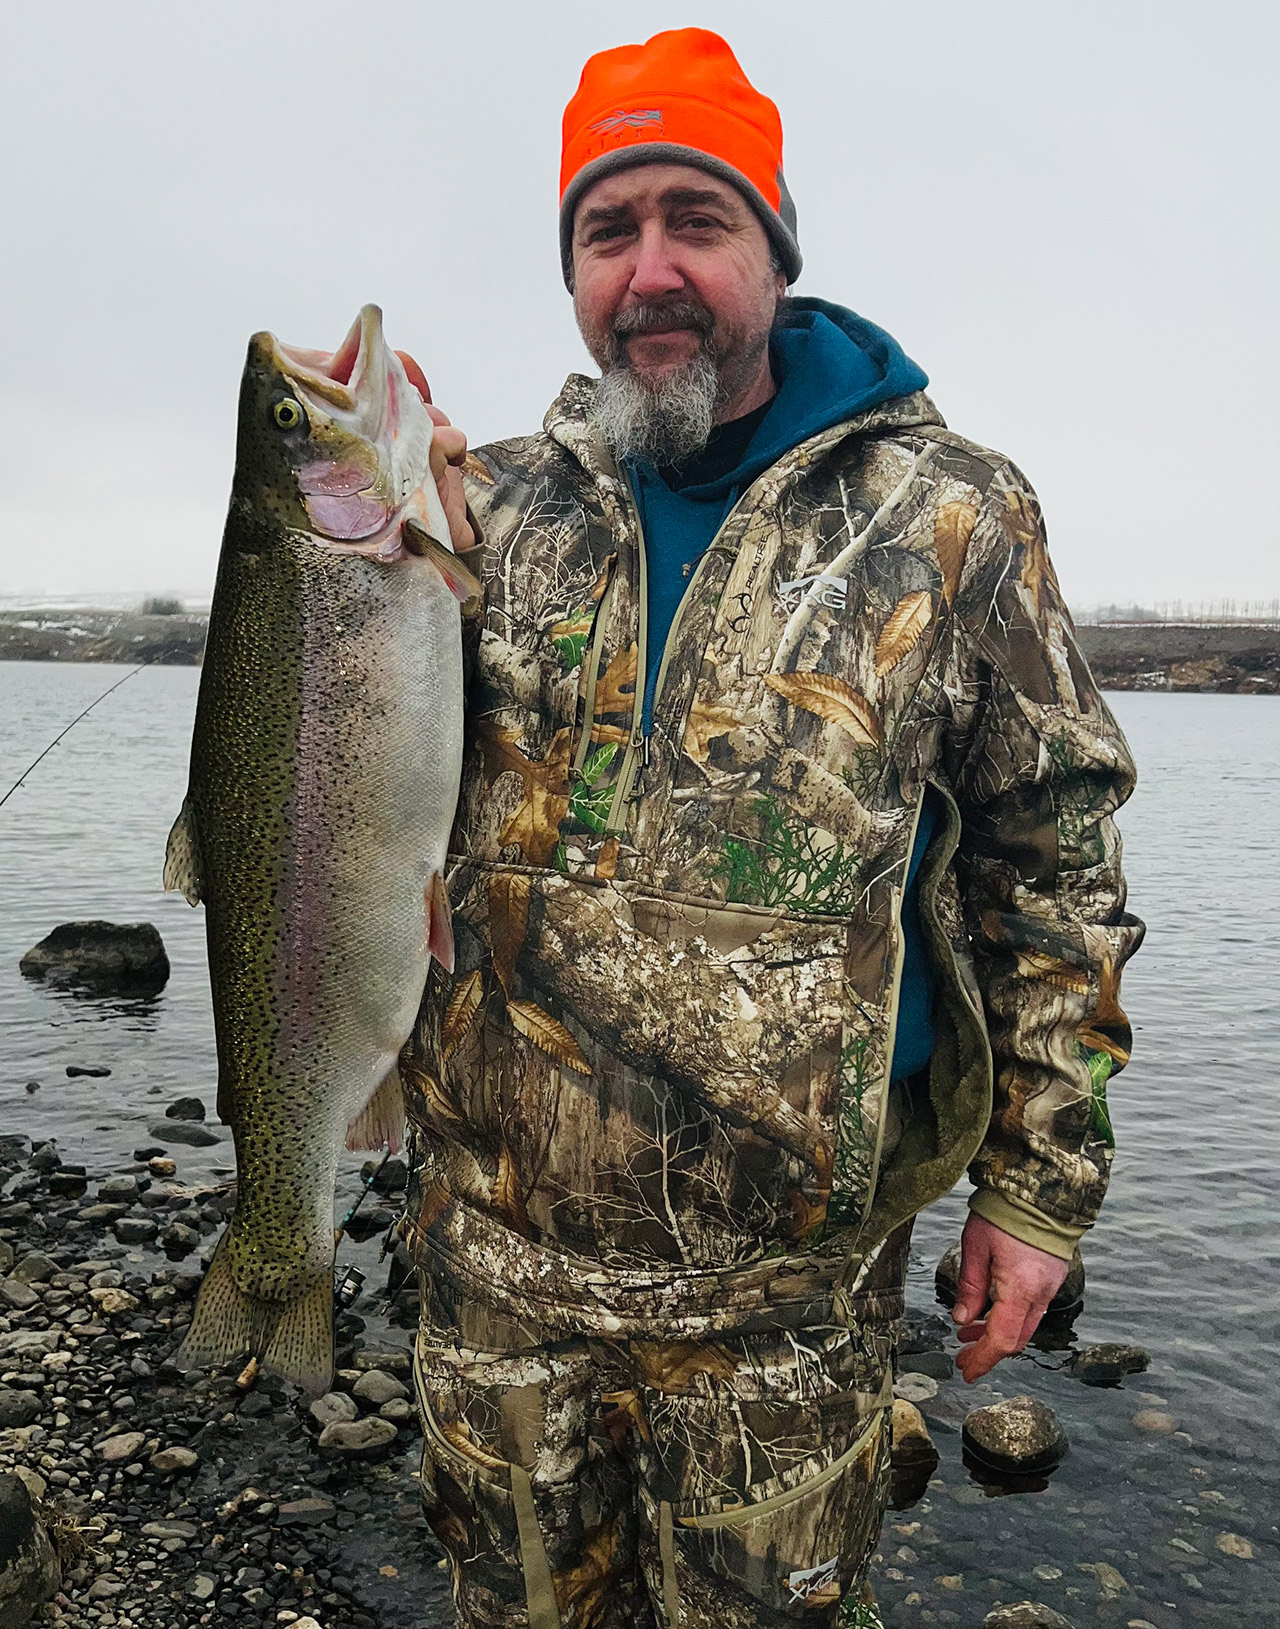 This week's photo is of Keith with one of the trout we caught.